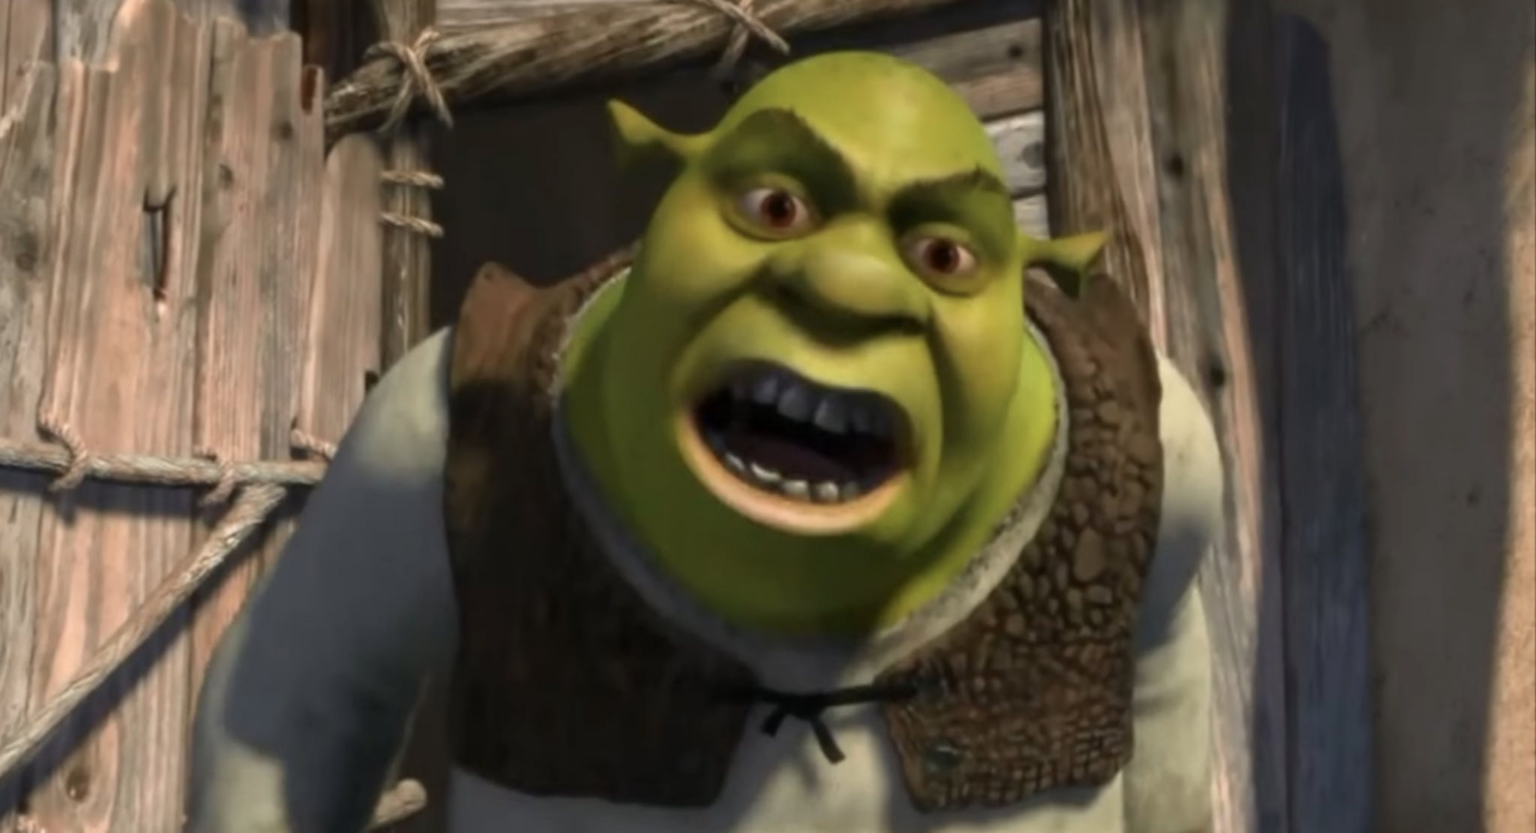 The Meaning Behind the Pop Culture Term 'Shrek'